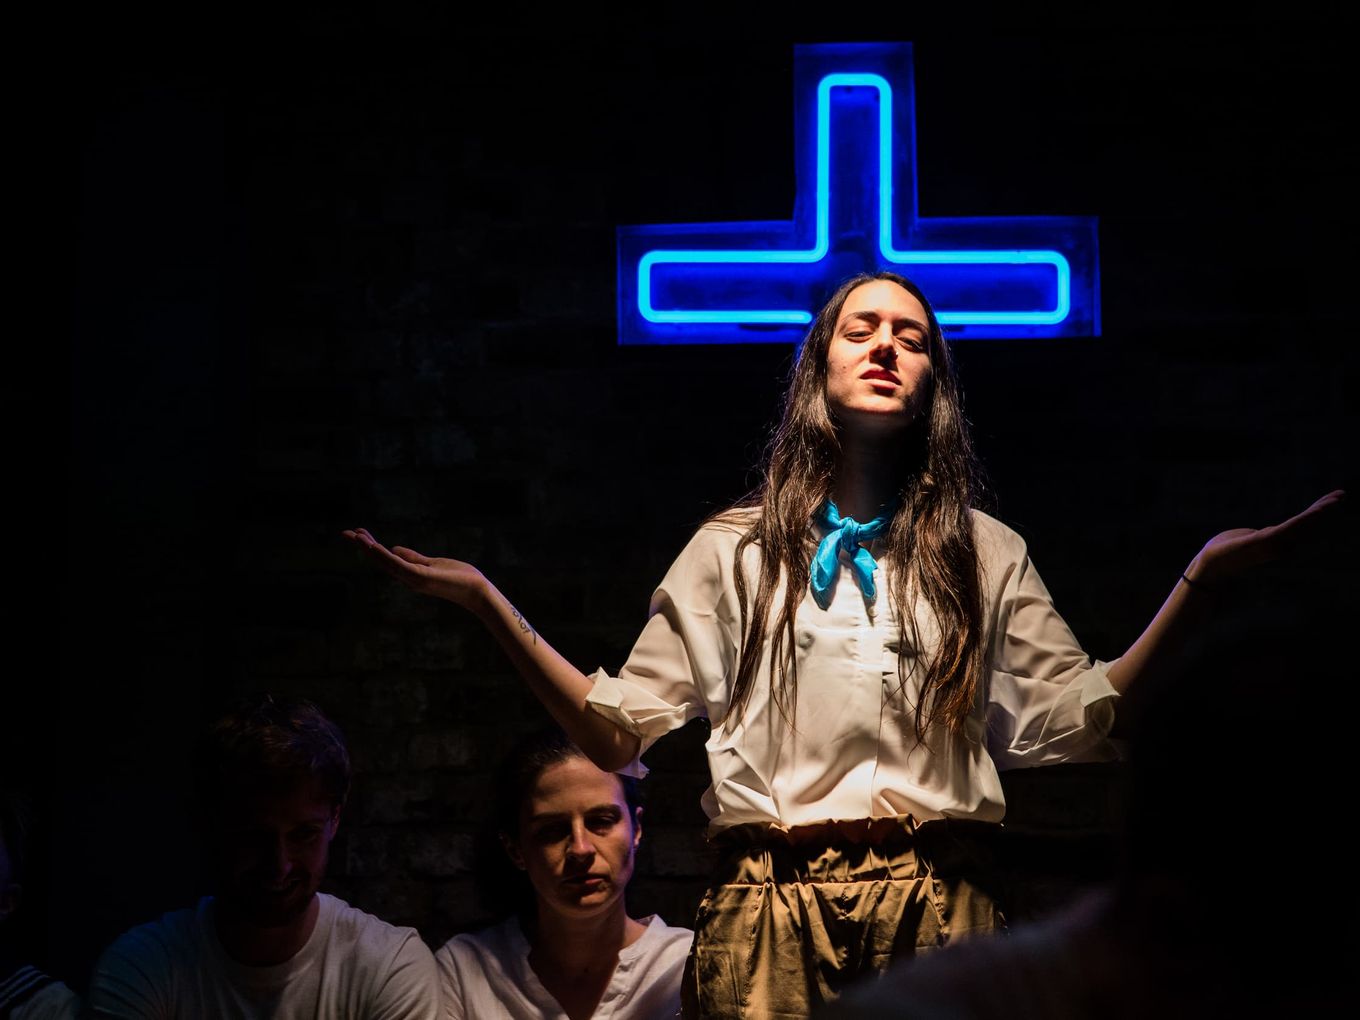 A person with long hair stands hands outstretched in front of a blue neon cross